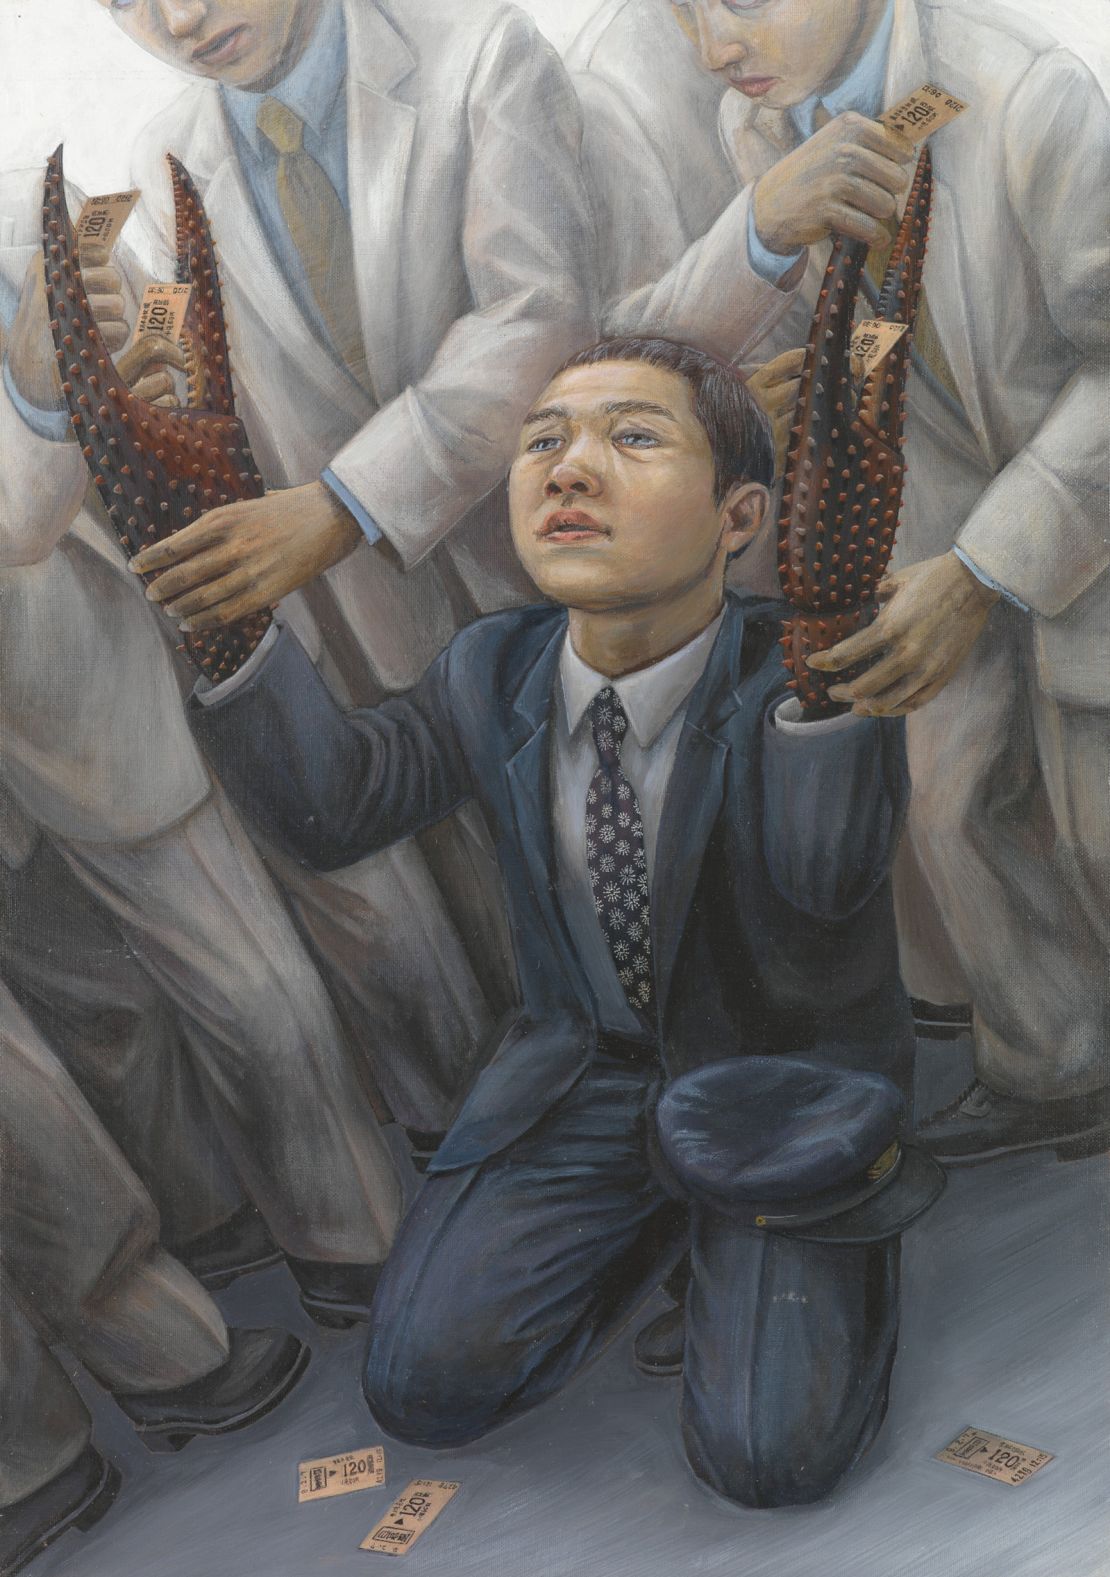 Another painting entitled "Gripe," painted by Ishidia in 1996, portrays a Japanese salaryman with lobster claws for hands.